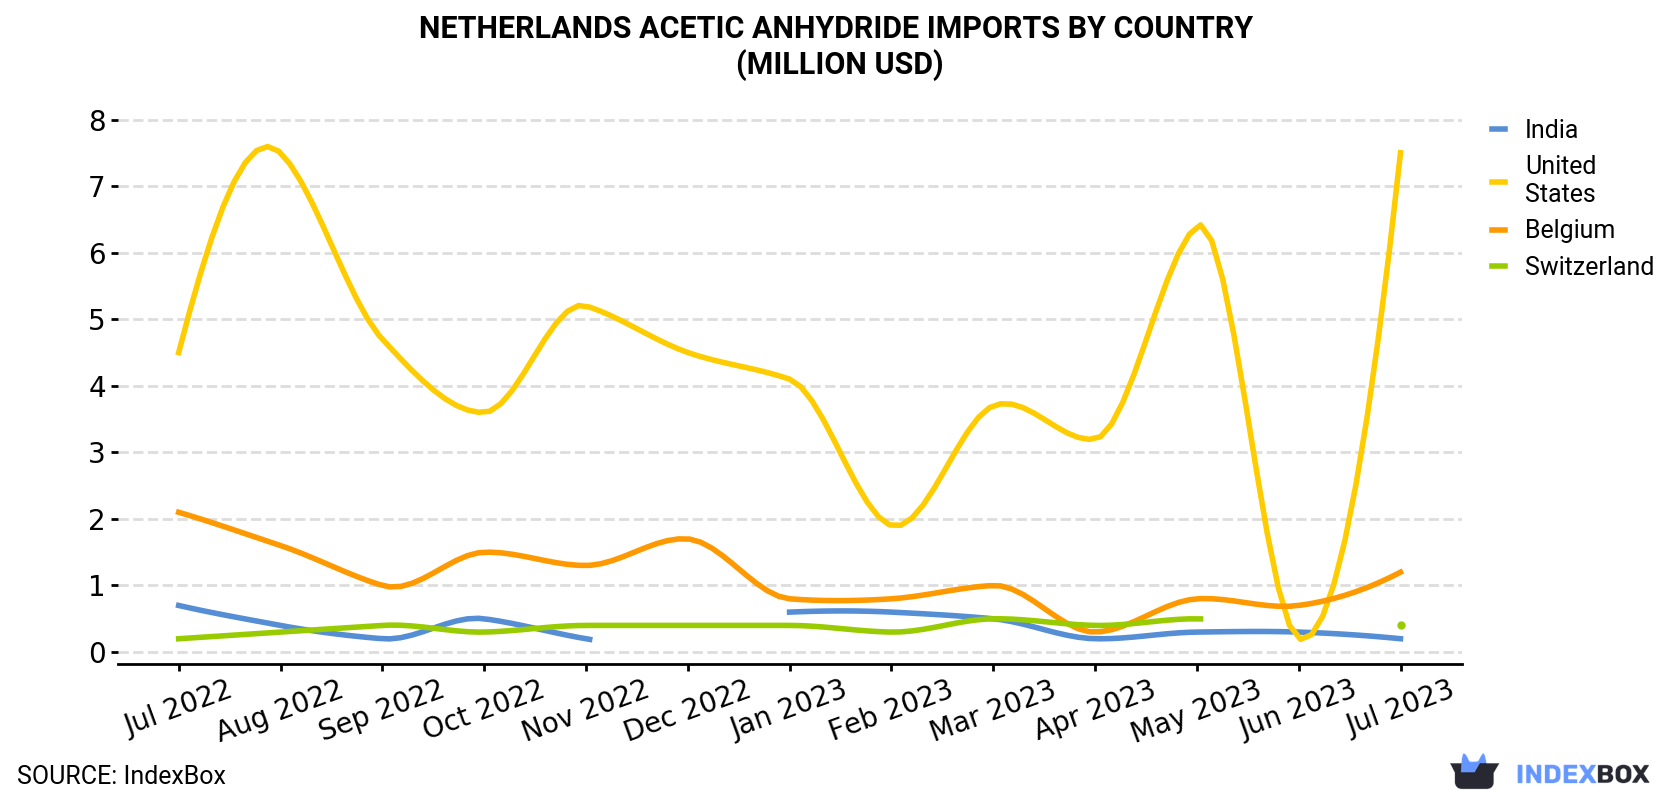 Netherlands Acetic Anhydride Imports By Country (Million USD)